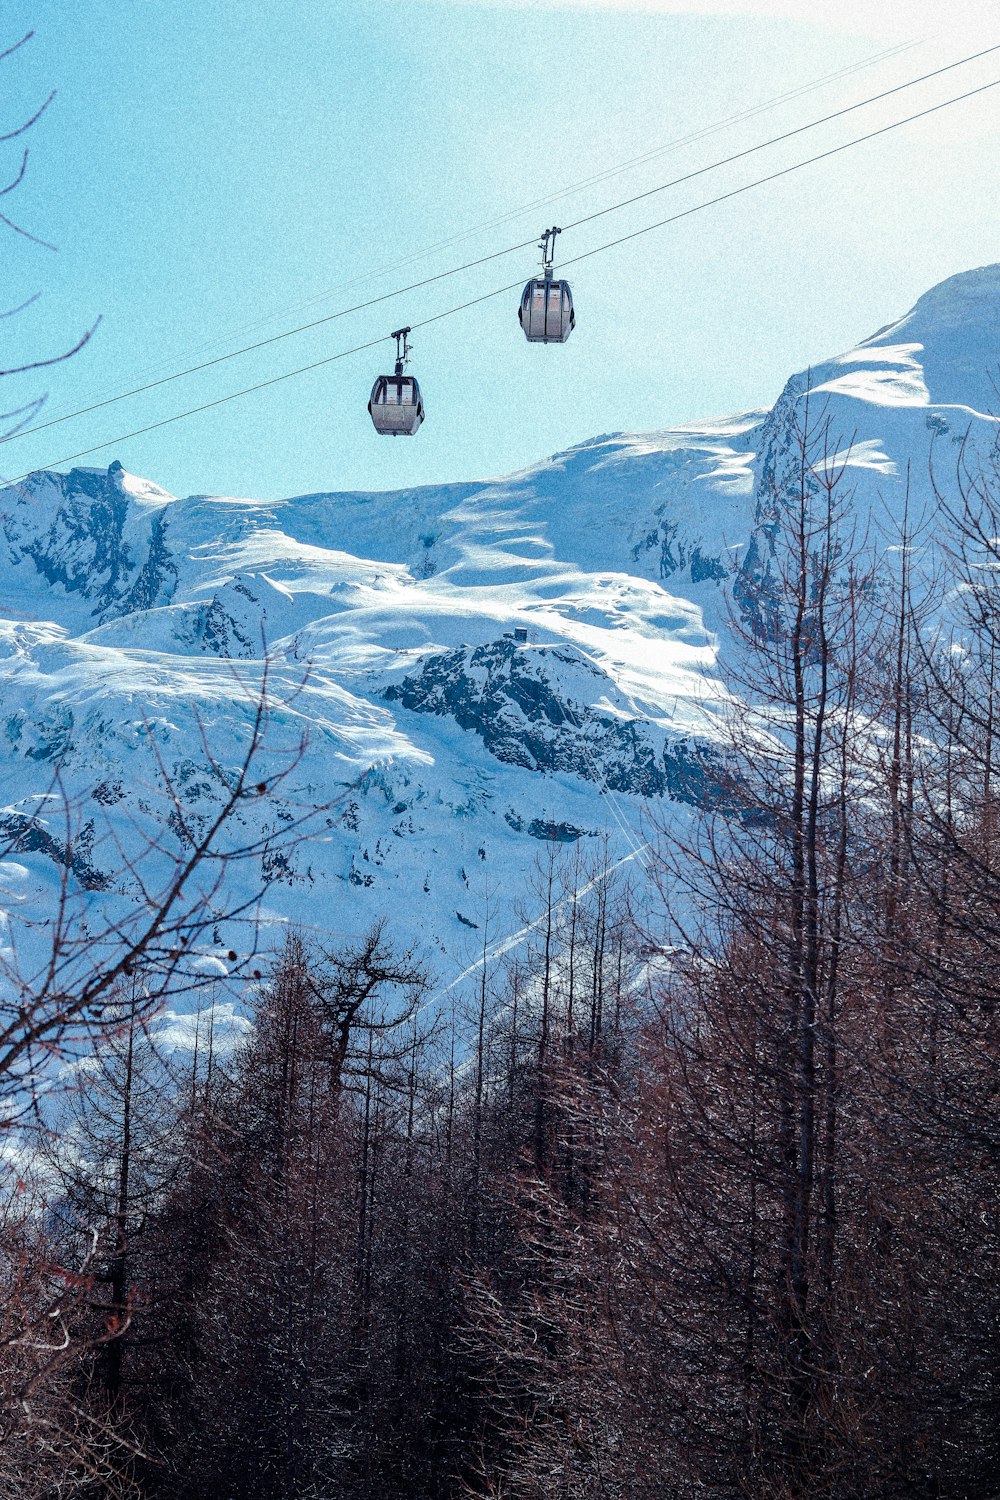 black cable car over snow covered mountain